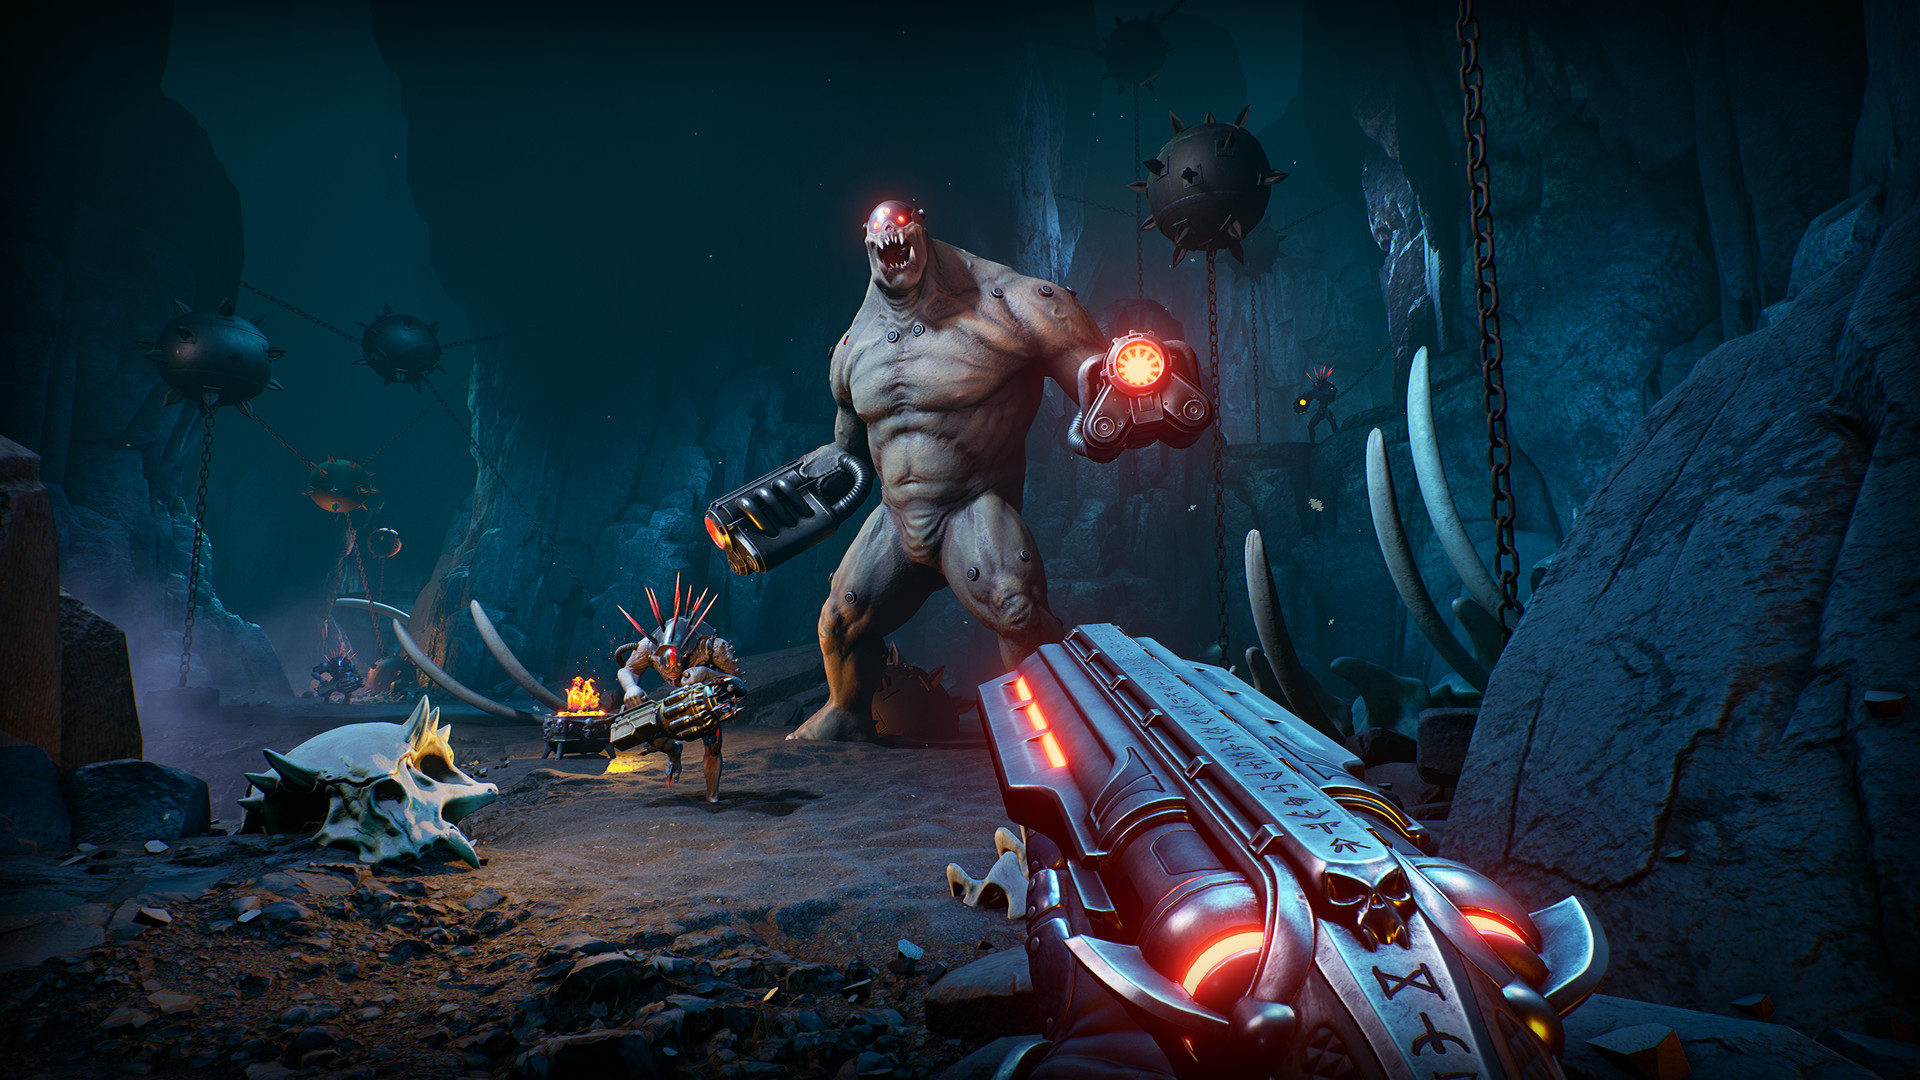 At the end of August, the DOOM/Quake shooter will be coming to PC named Scathe |  news block